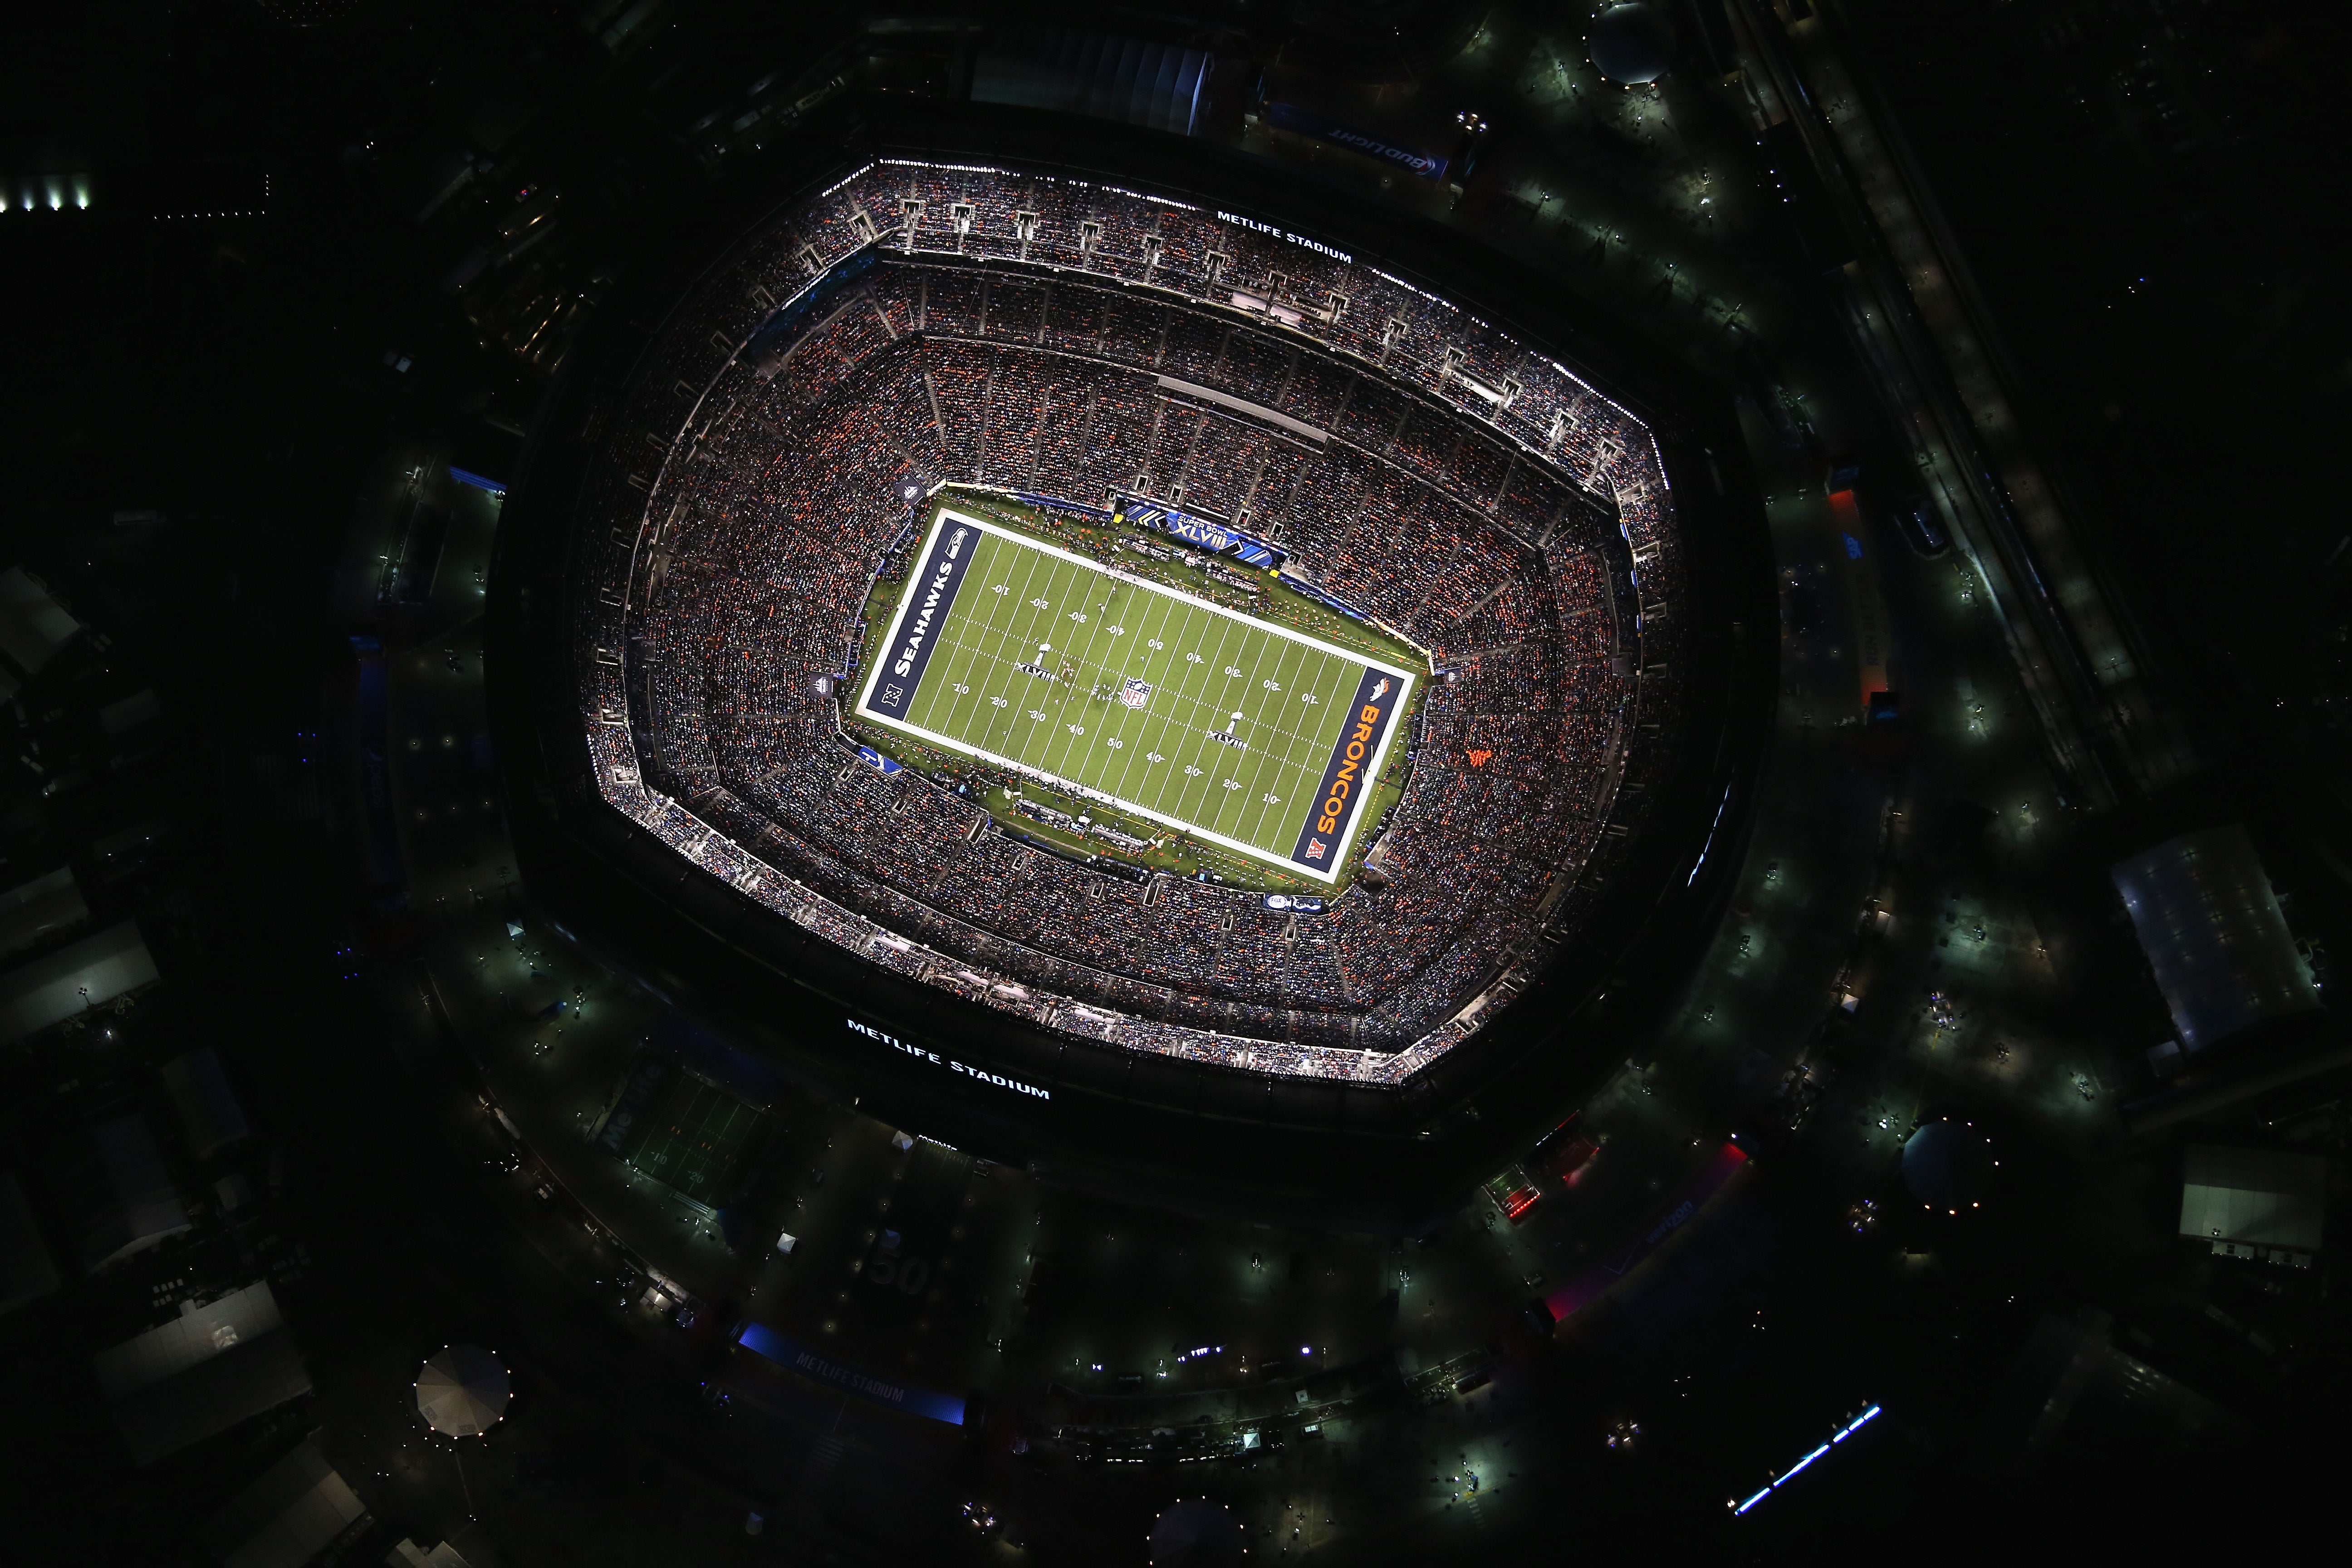 Metlife Stadium hosted Super Bowl XLVIII between the Seattle Seahawks and the Denver Broncos in 2014